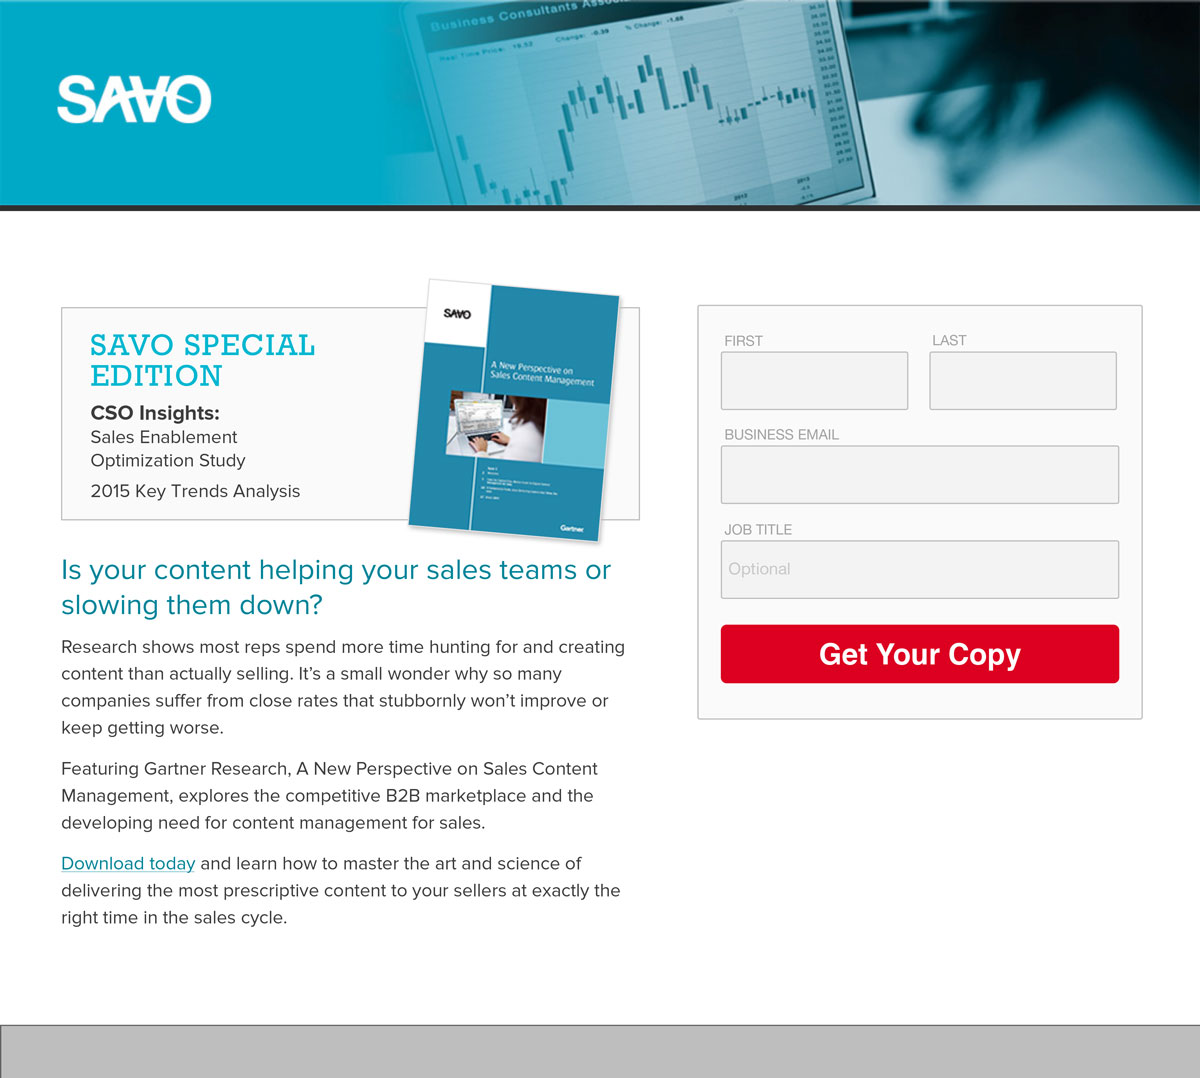 Lead Generation Campaign gated landing page example 2, with form